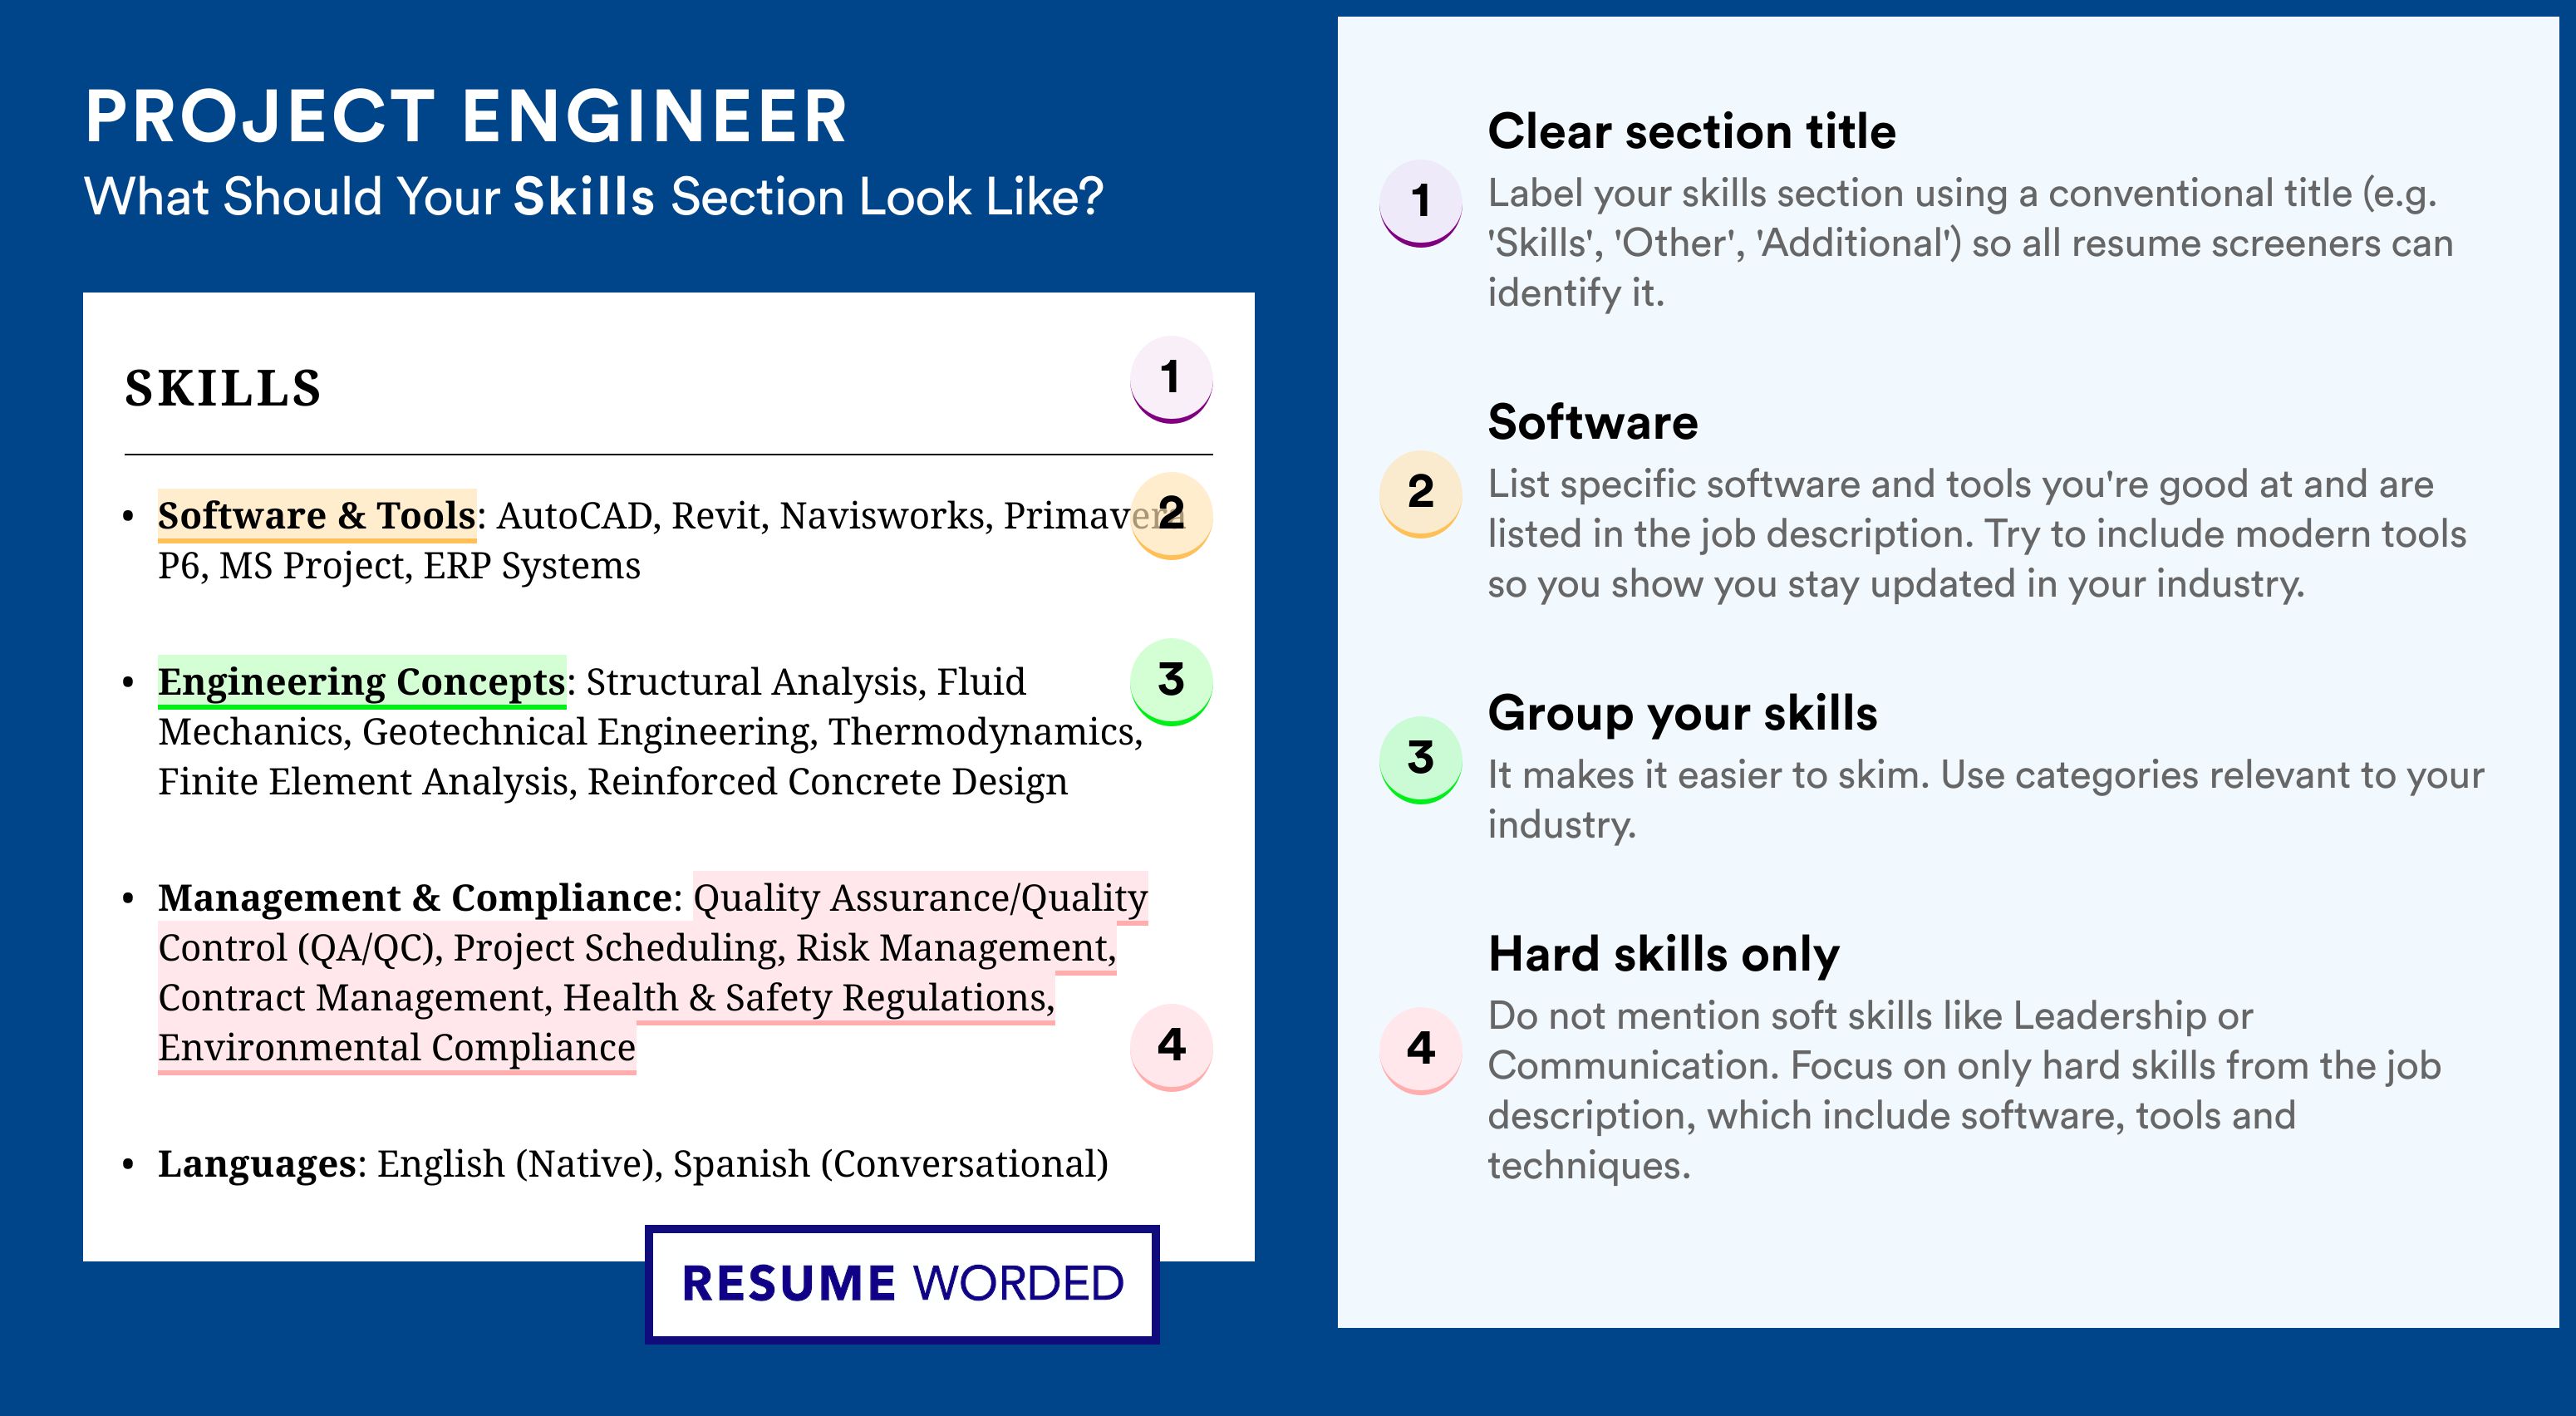 How To Write Your Skills Section - Project Engineer Roles